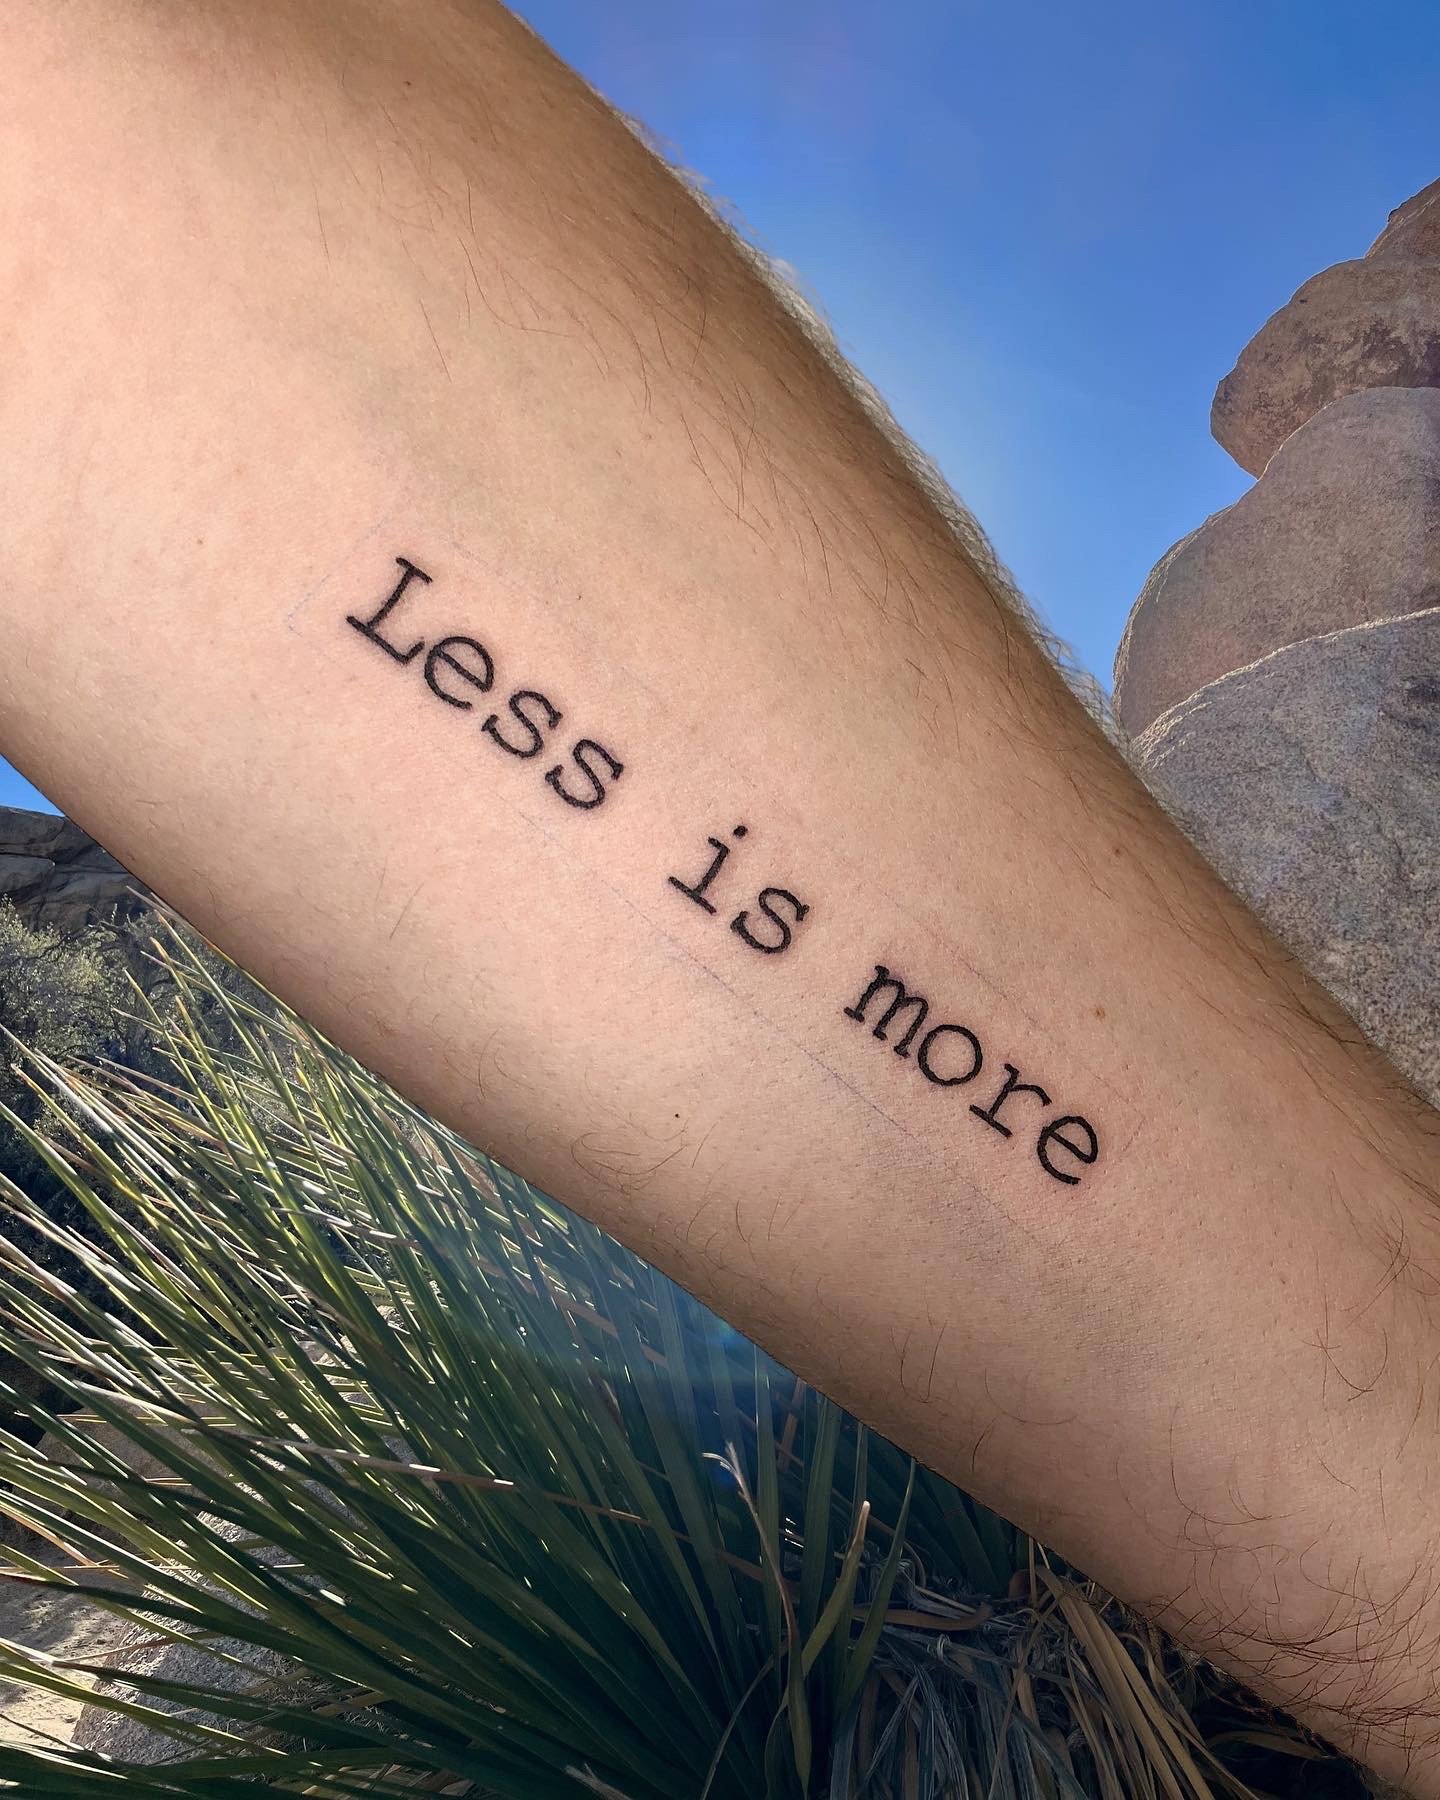 Less is More typo tattoo on lower inner arm .JPG